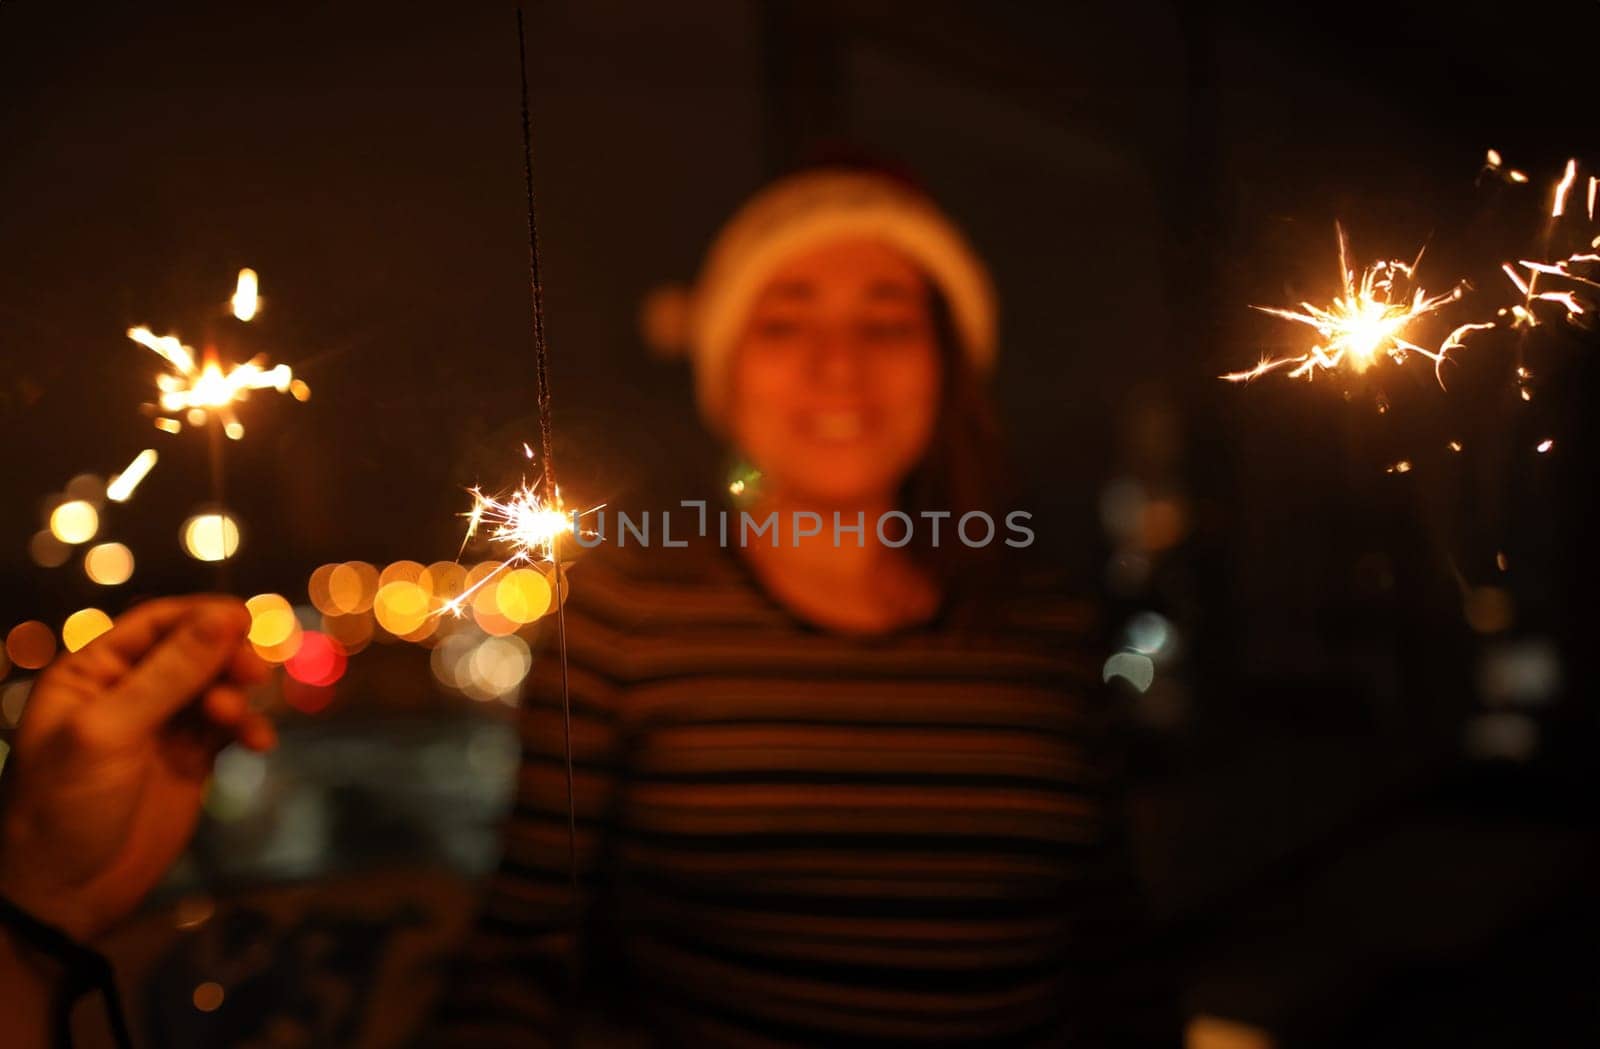 Sparkler in hand burn brightly. In background is woman with santa claus hat.